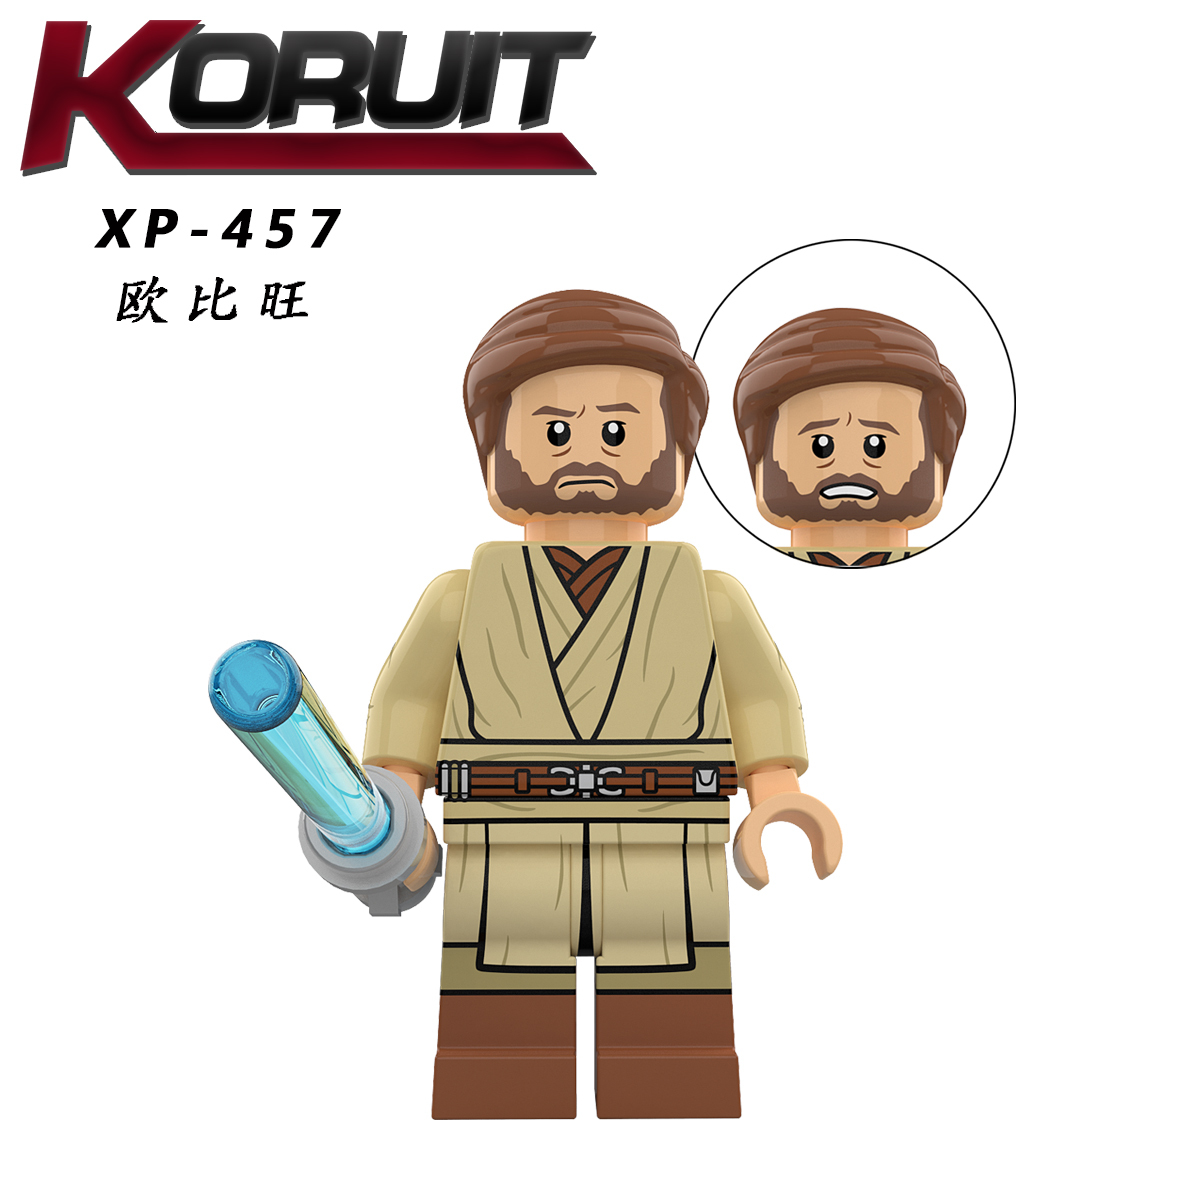 KT1059 XP451 XP452 XP453 XP454 XP455 XP456 XP457 XP458 Star Wars  Darth Maul Obi Wan Anakin Movie Series Building Blocks Action Figures Educational Toys For Kids Gifts